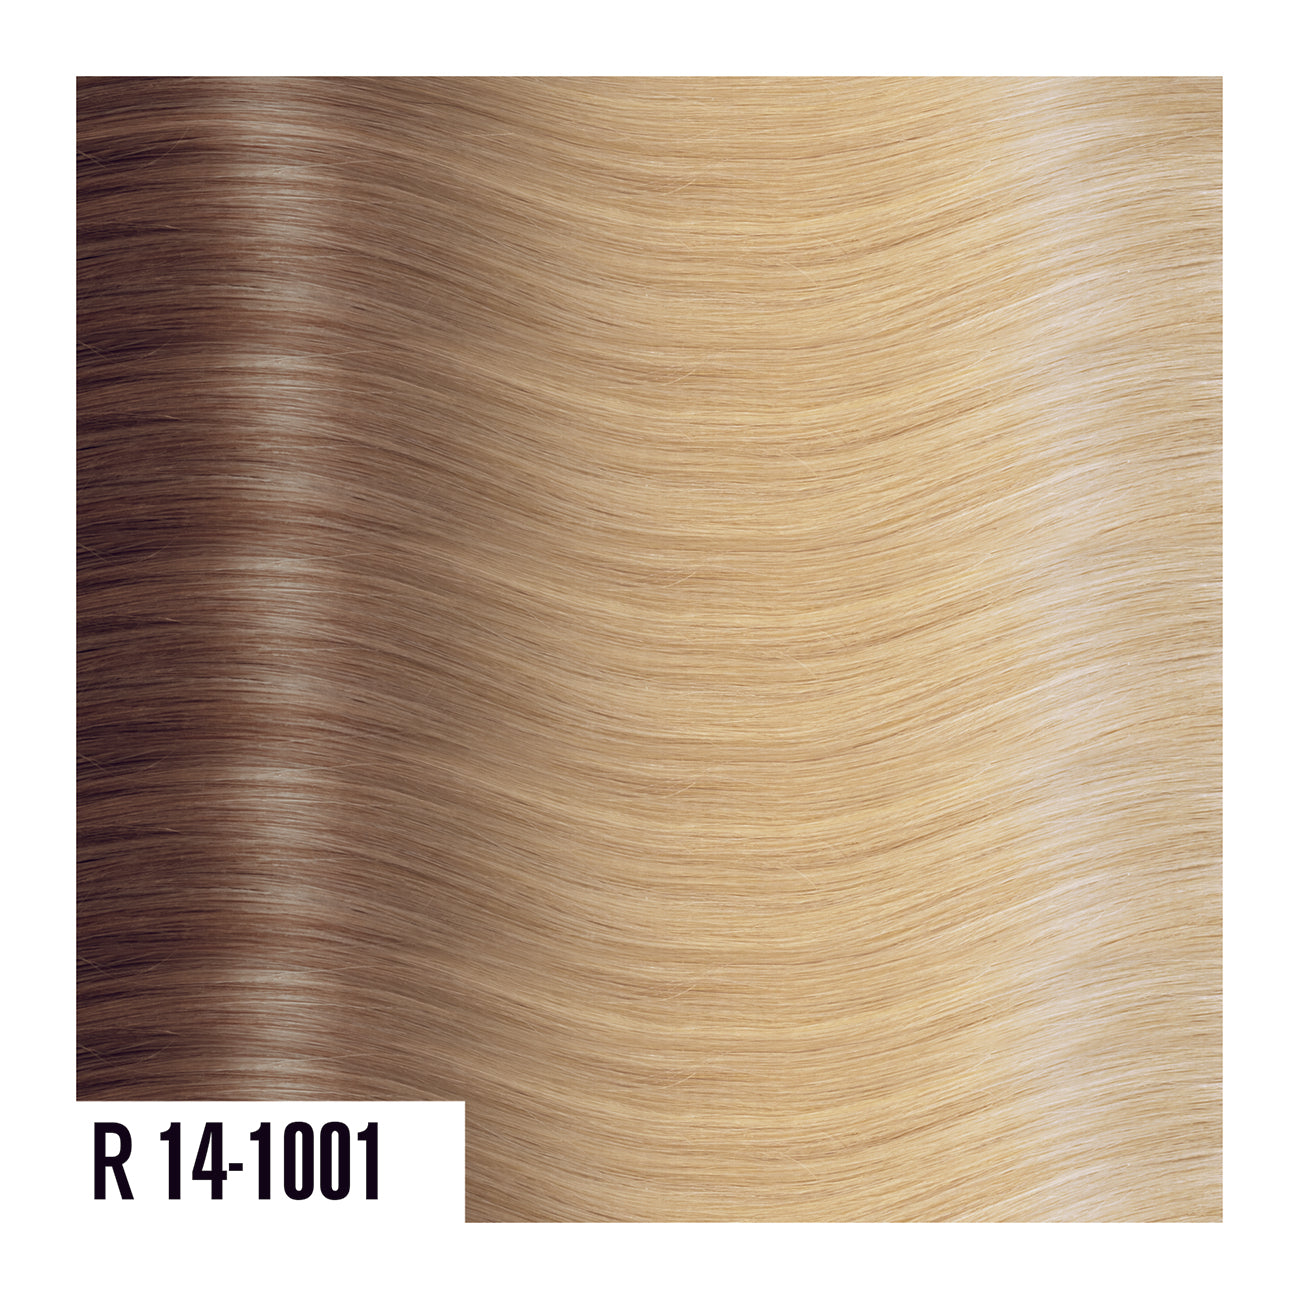 R14-1001 - Rooted Prime Tape In Light Brown Fade Into Light Blonde - Ombre colors are a beautiful gradual blend of 3 colors with darker roots and lighter ends. 